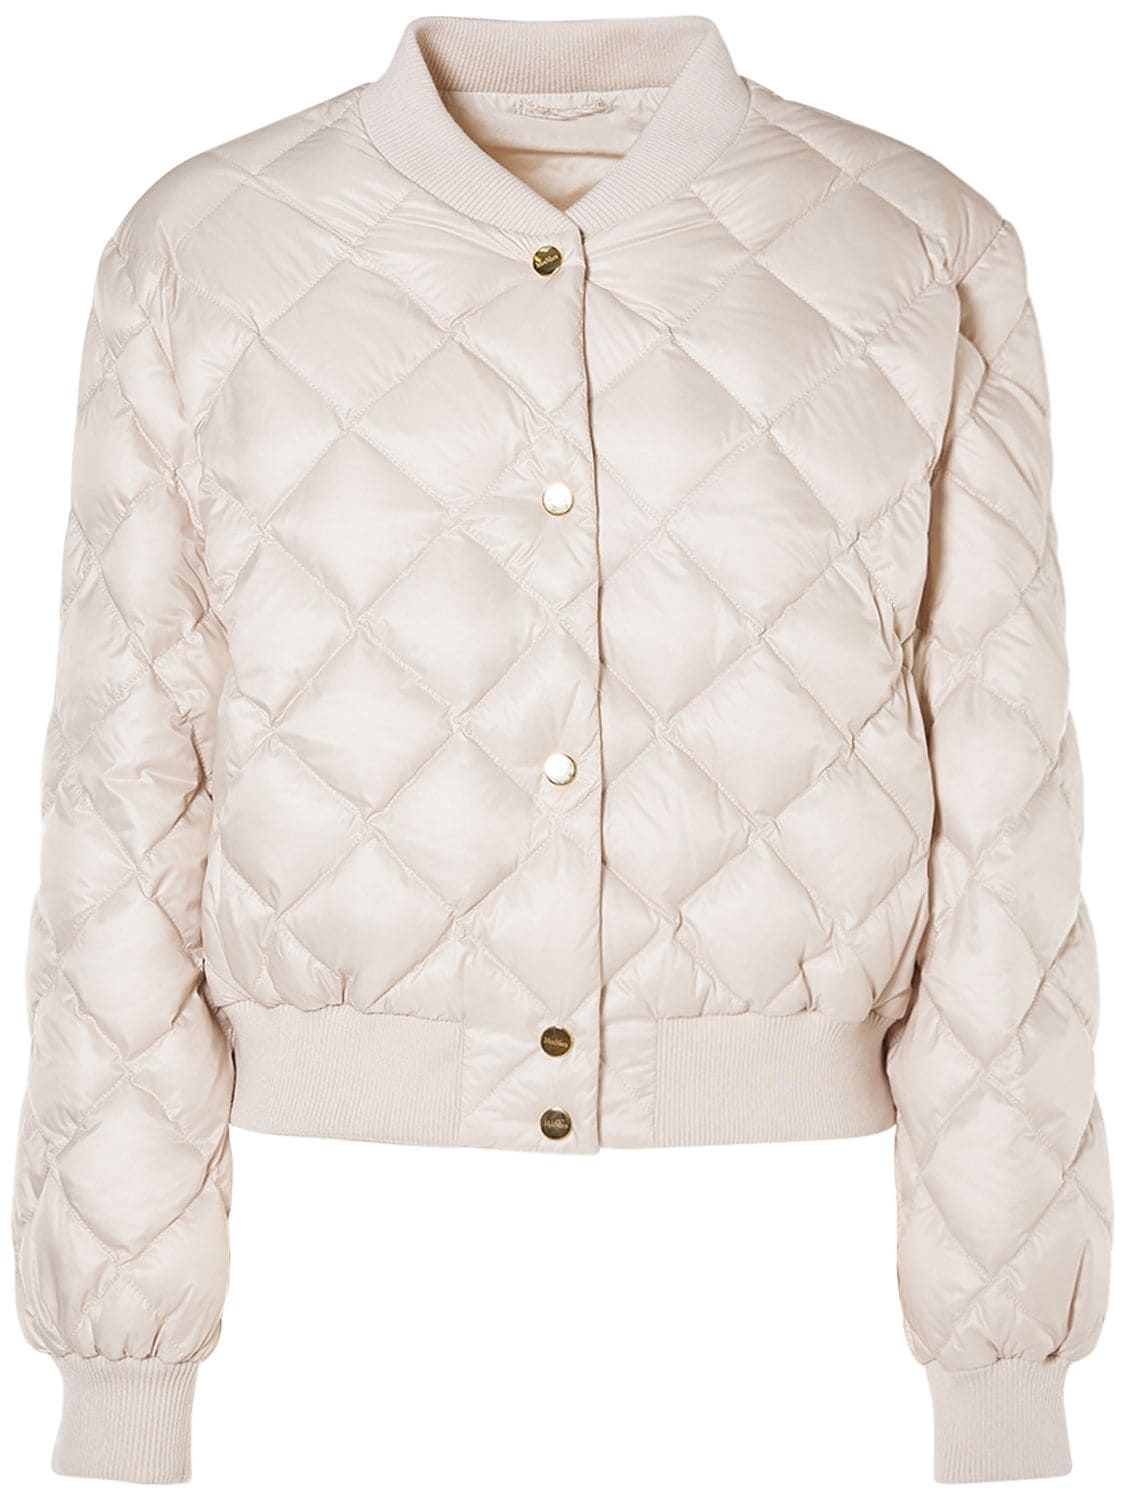 Max Mara Bsoft Tech Reversible Cropped Jacket In Sand